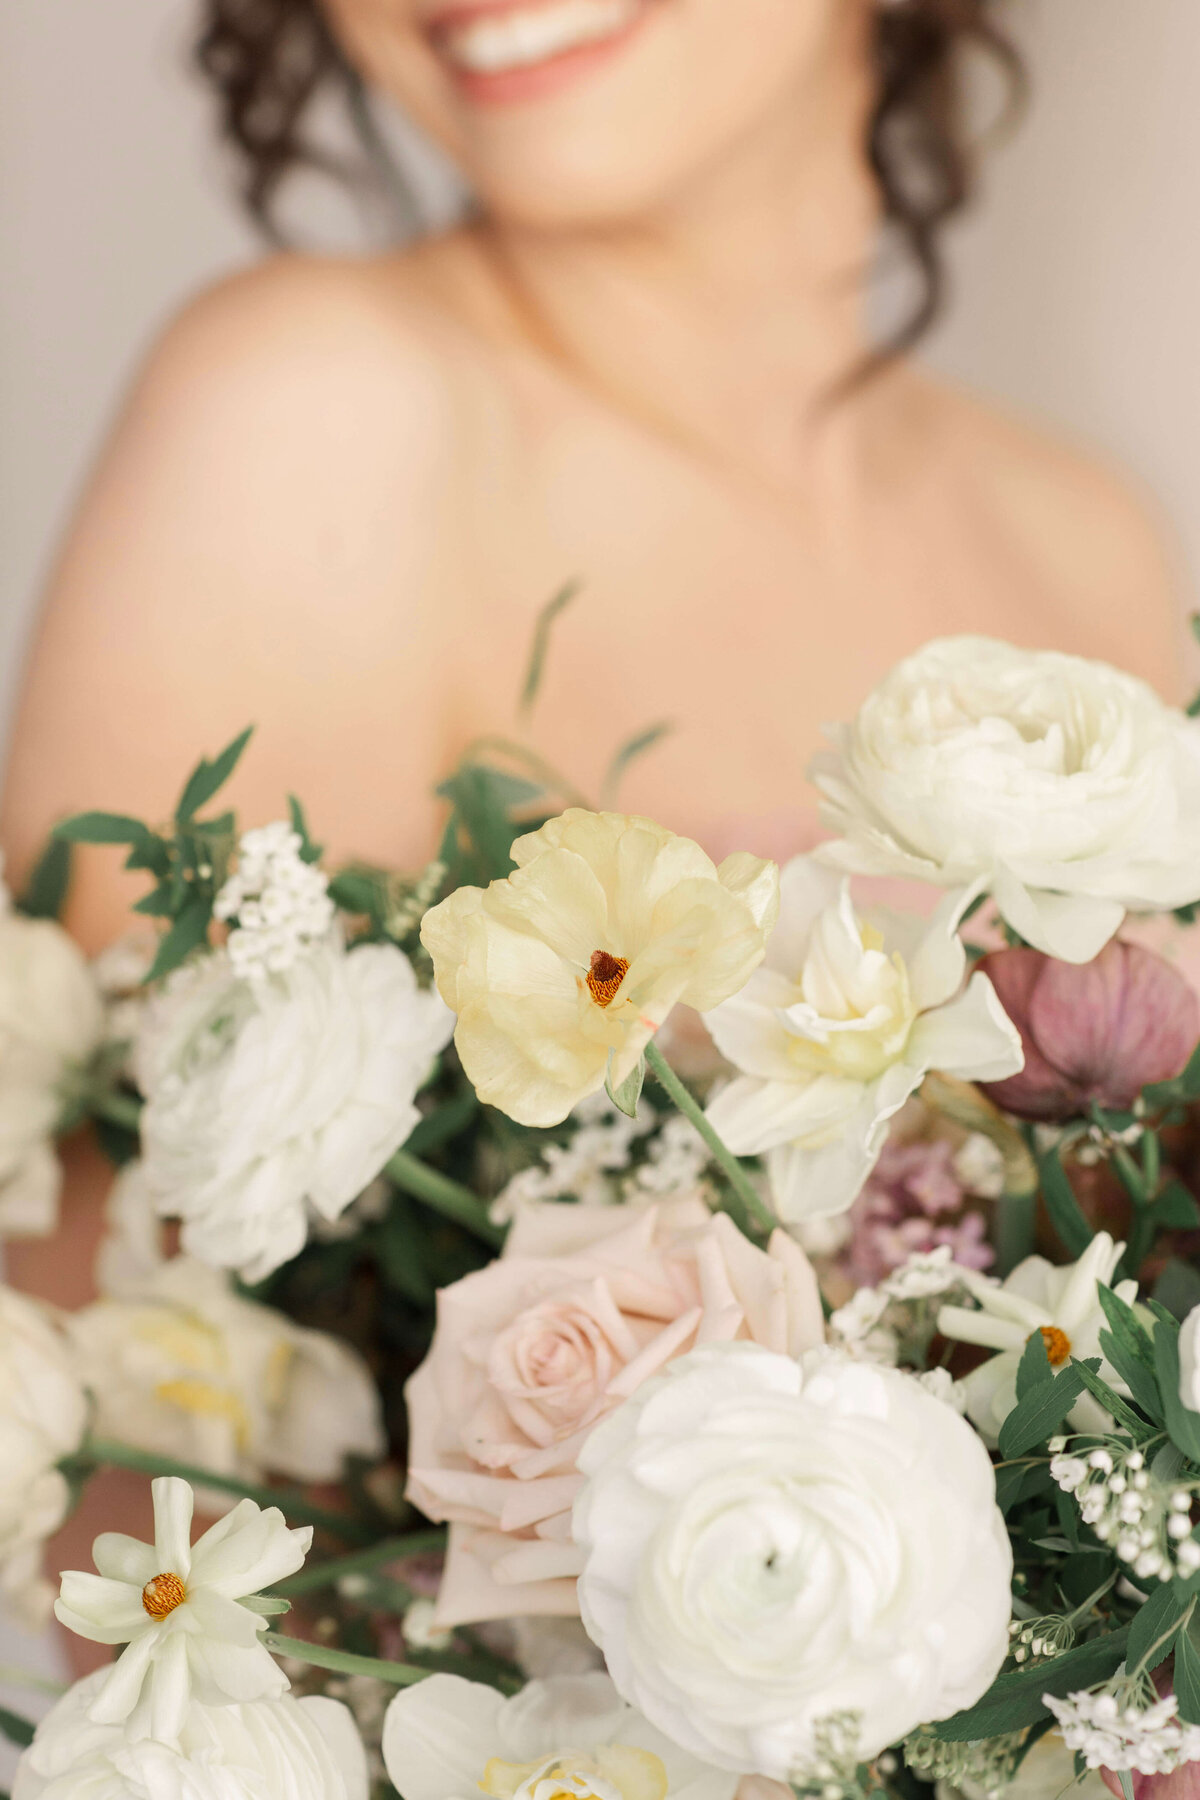 close up of woman holding large bouquet of flowers in ivory, peach, pale pink, lavender and greenery